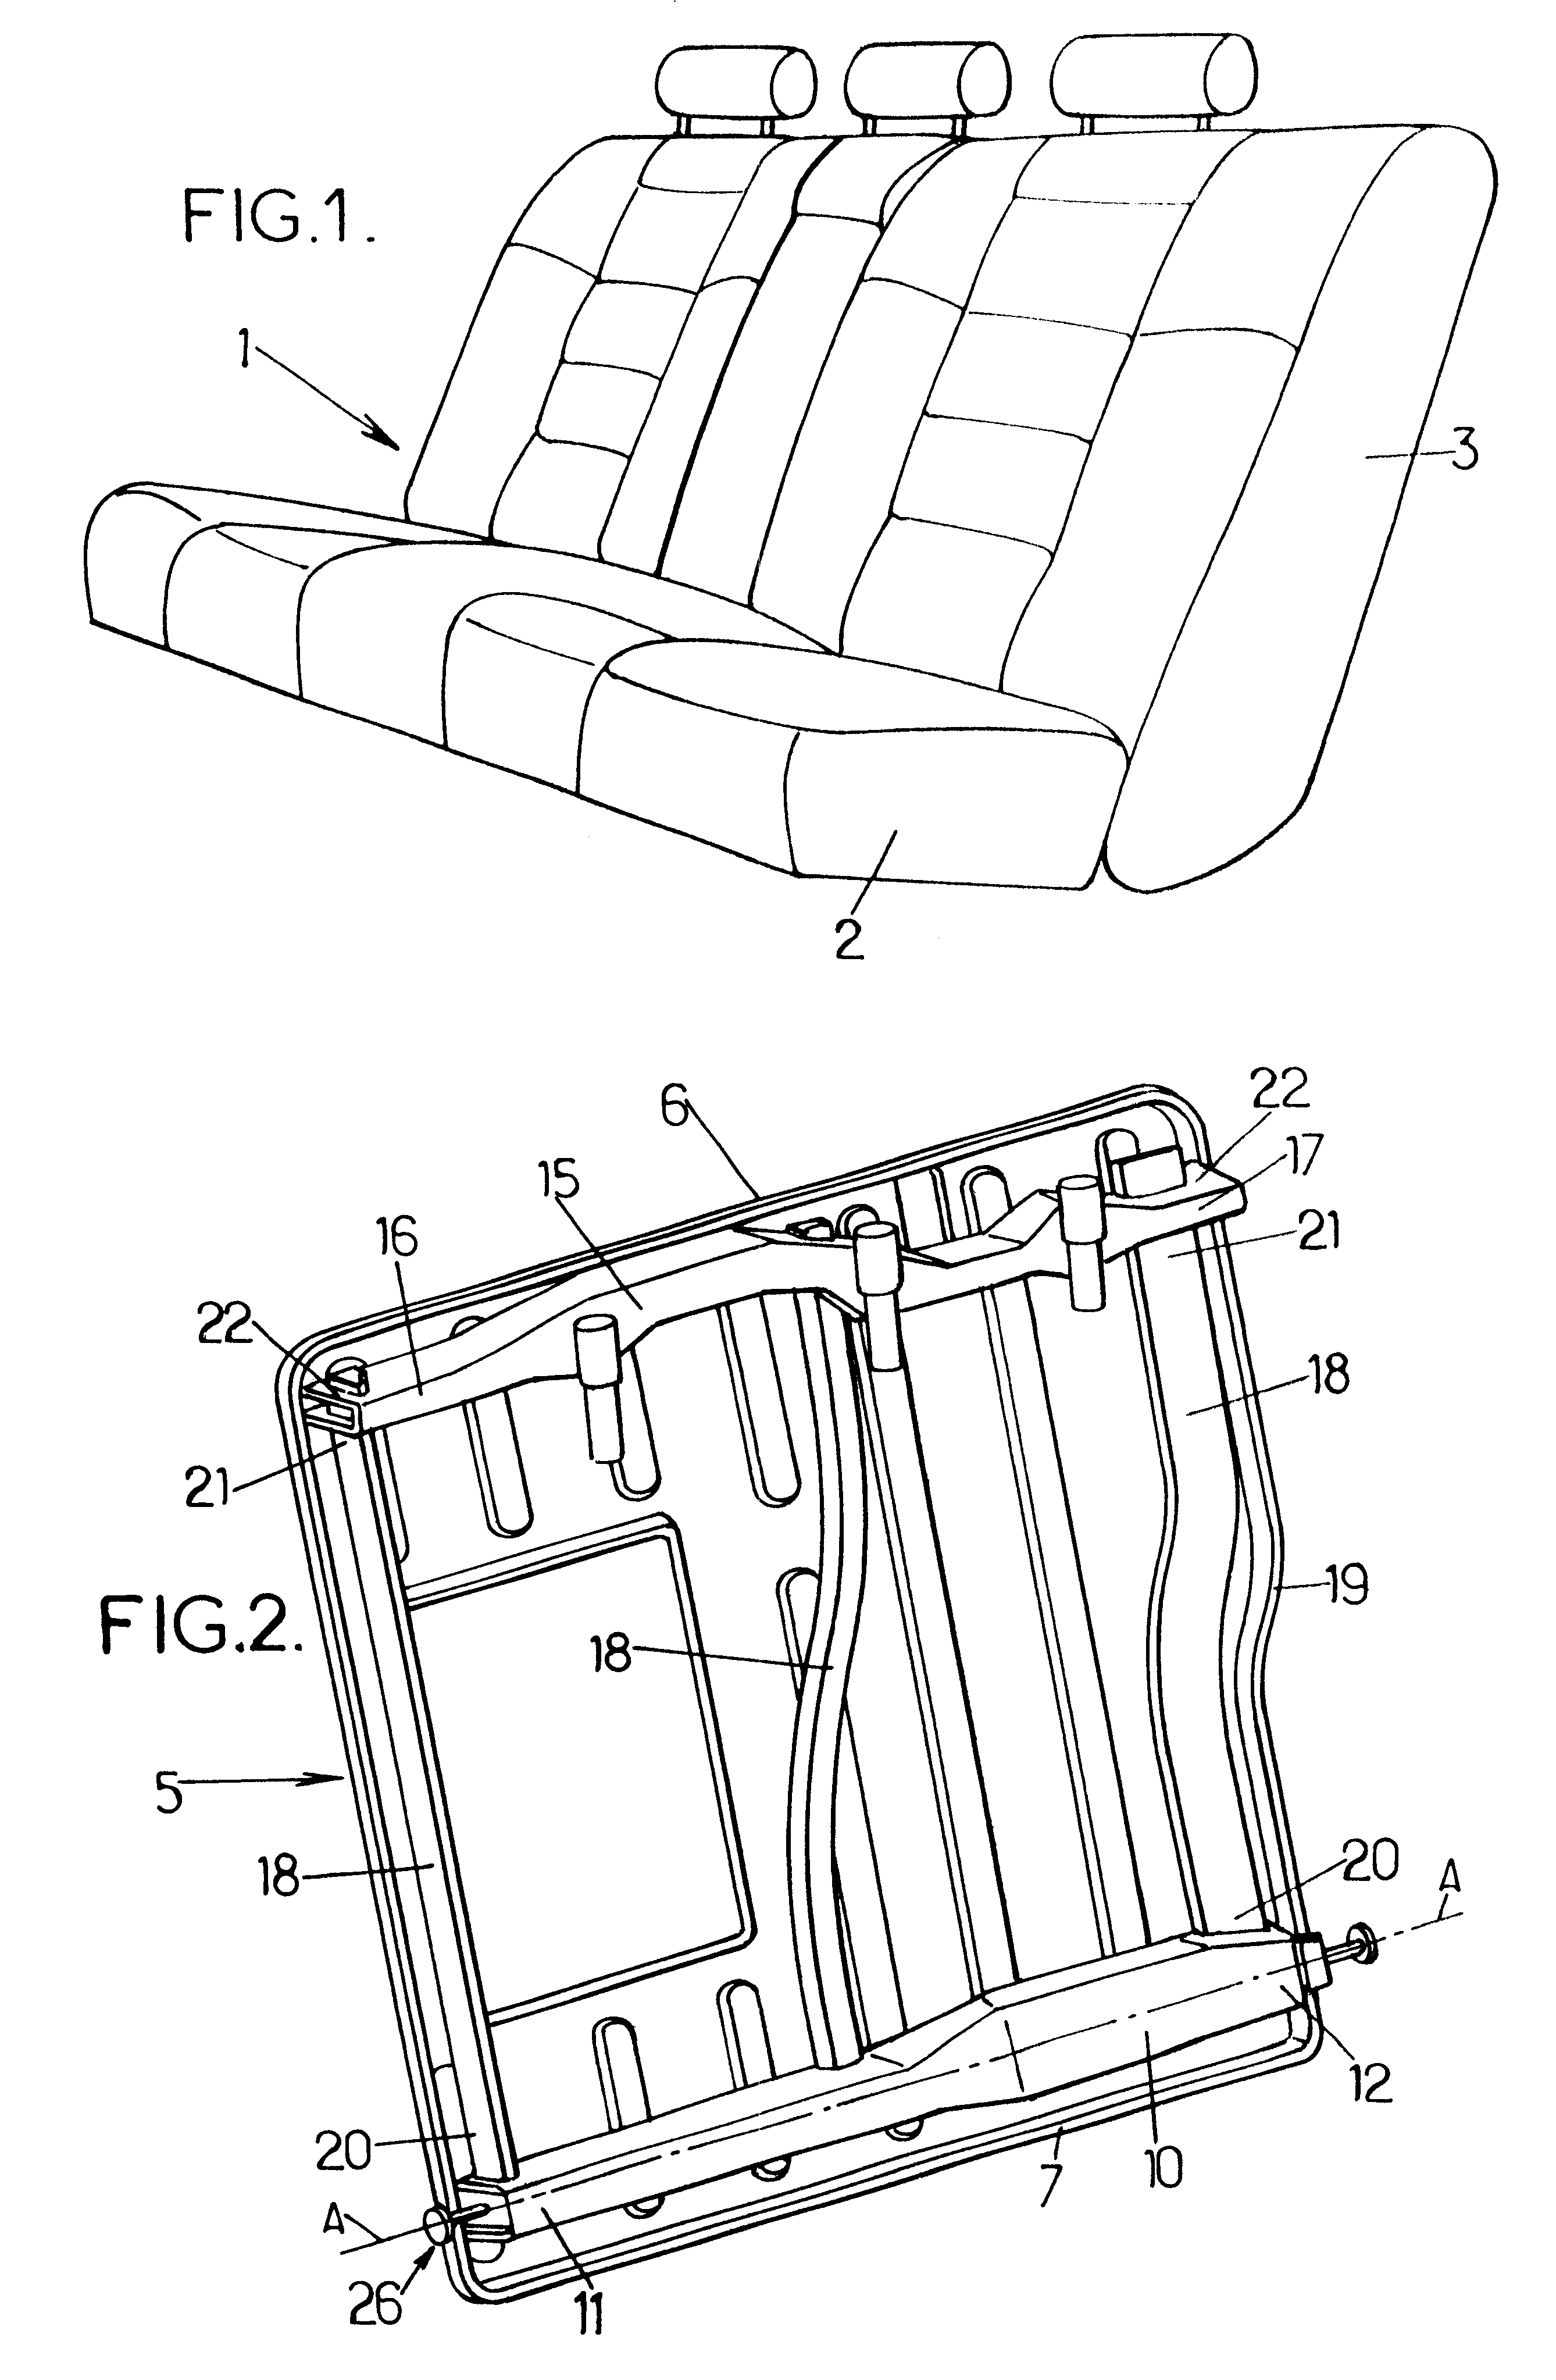 Automobile seat back structure articulated around fitted pivots